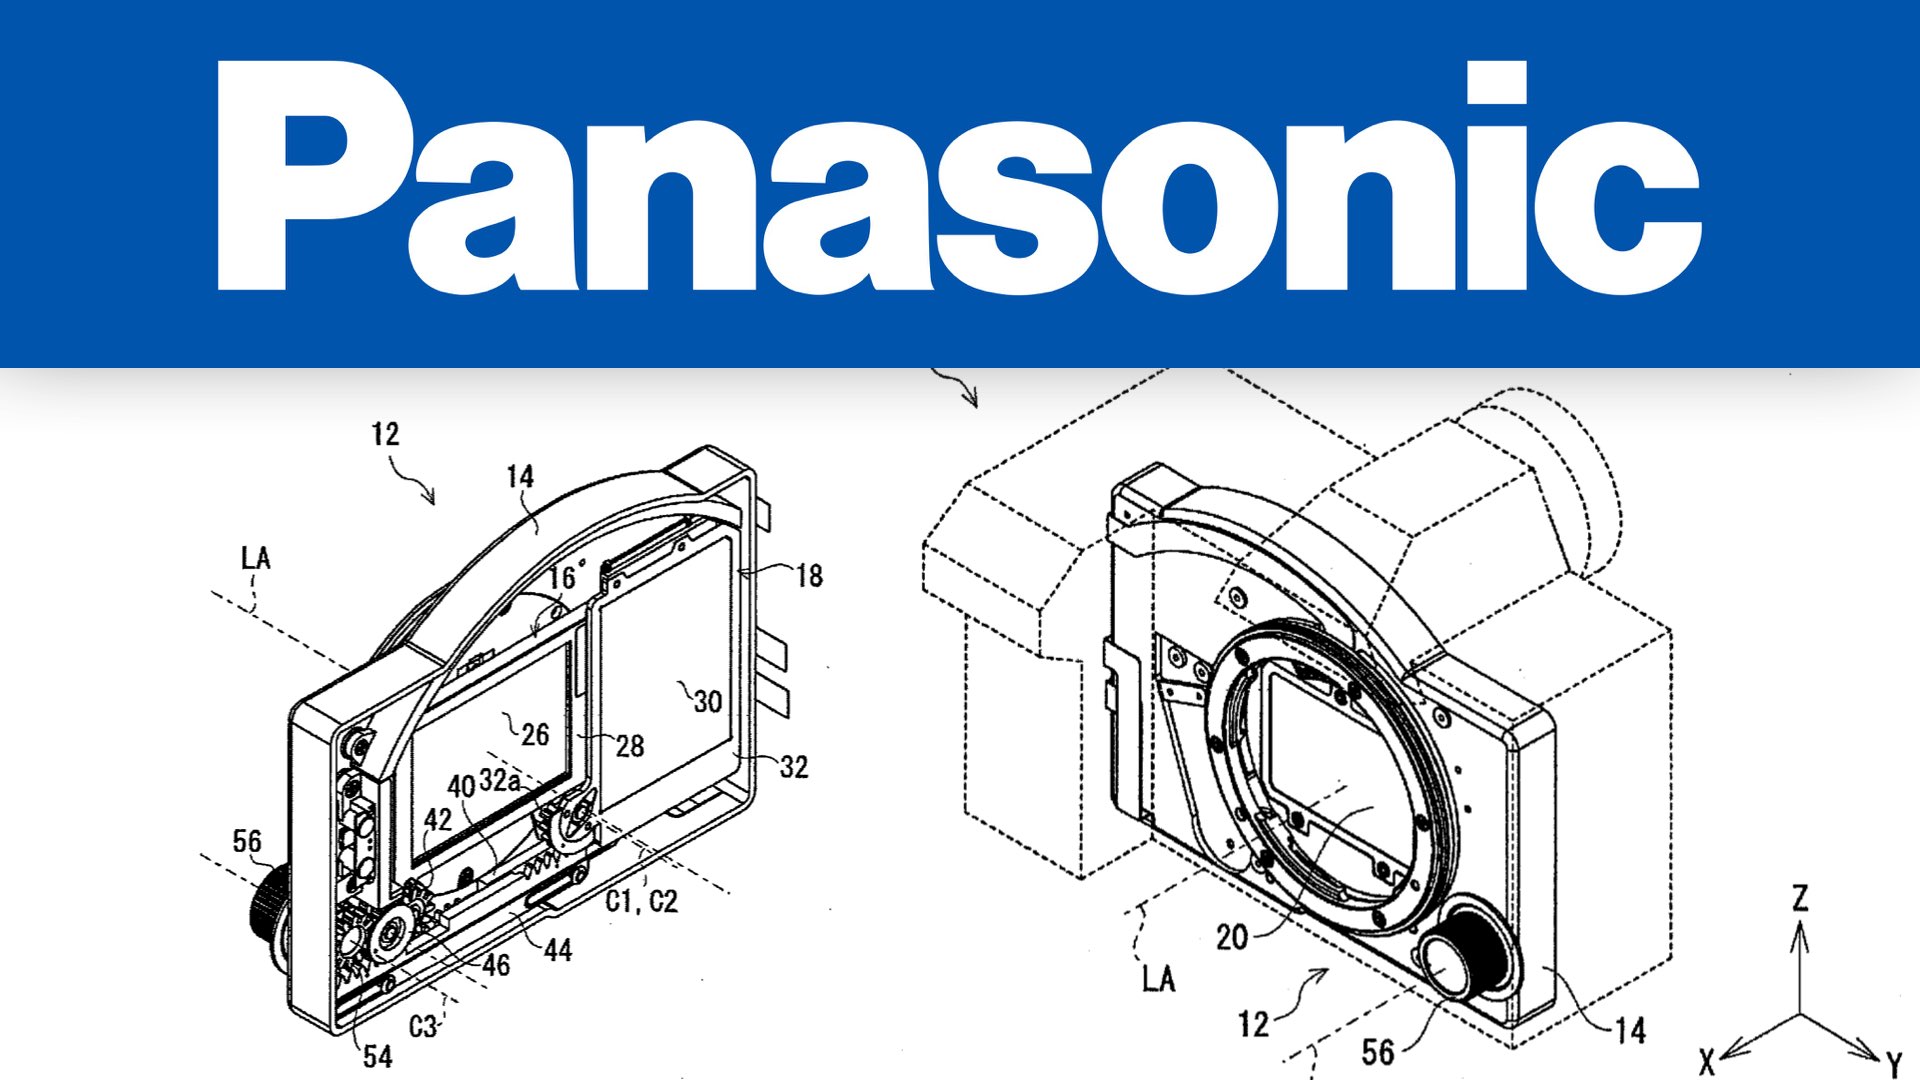 Panasonic-Develops-a-Variable-Built-In-Electronic-ND-Filter-1.jpeg